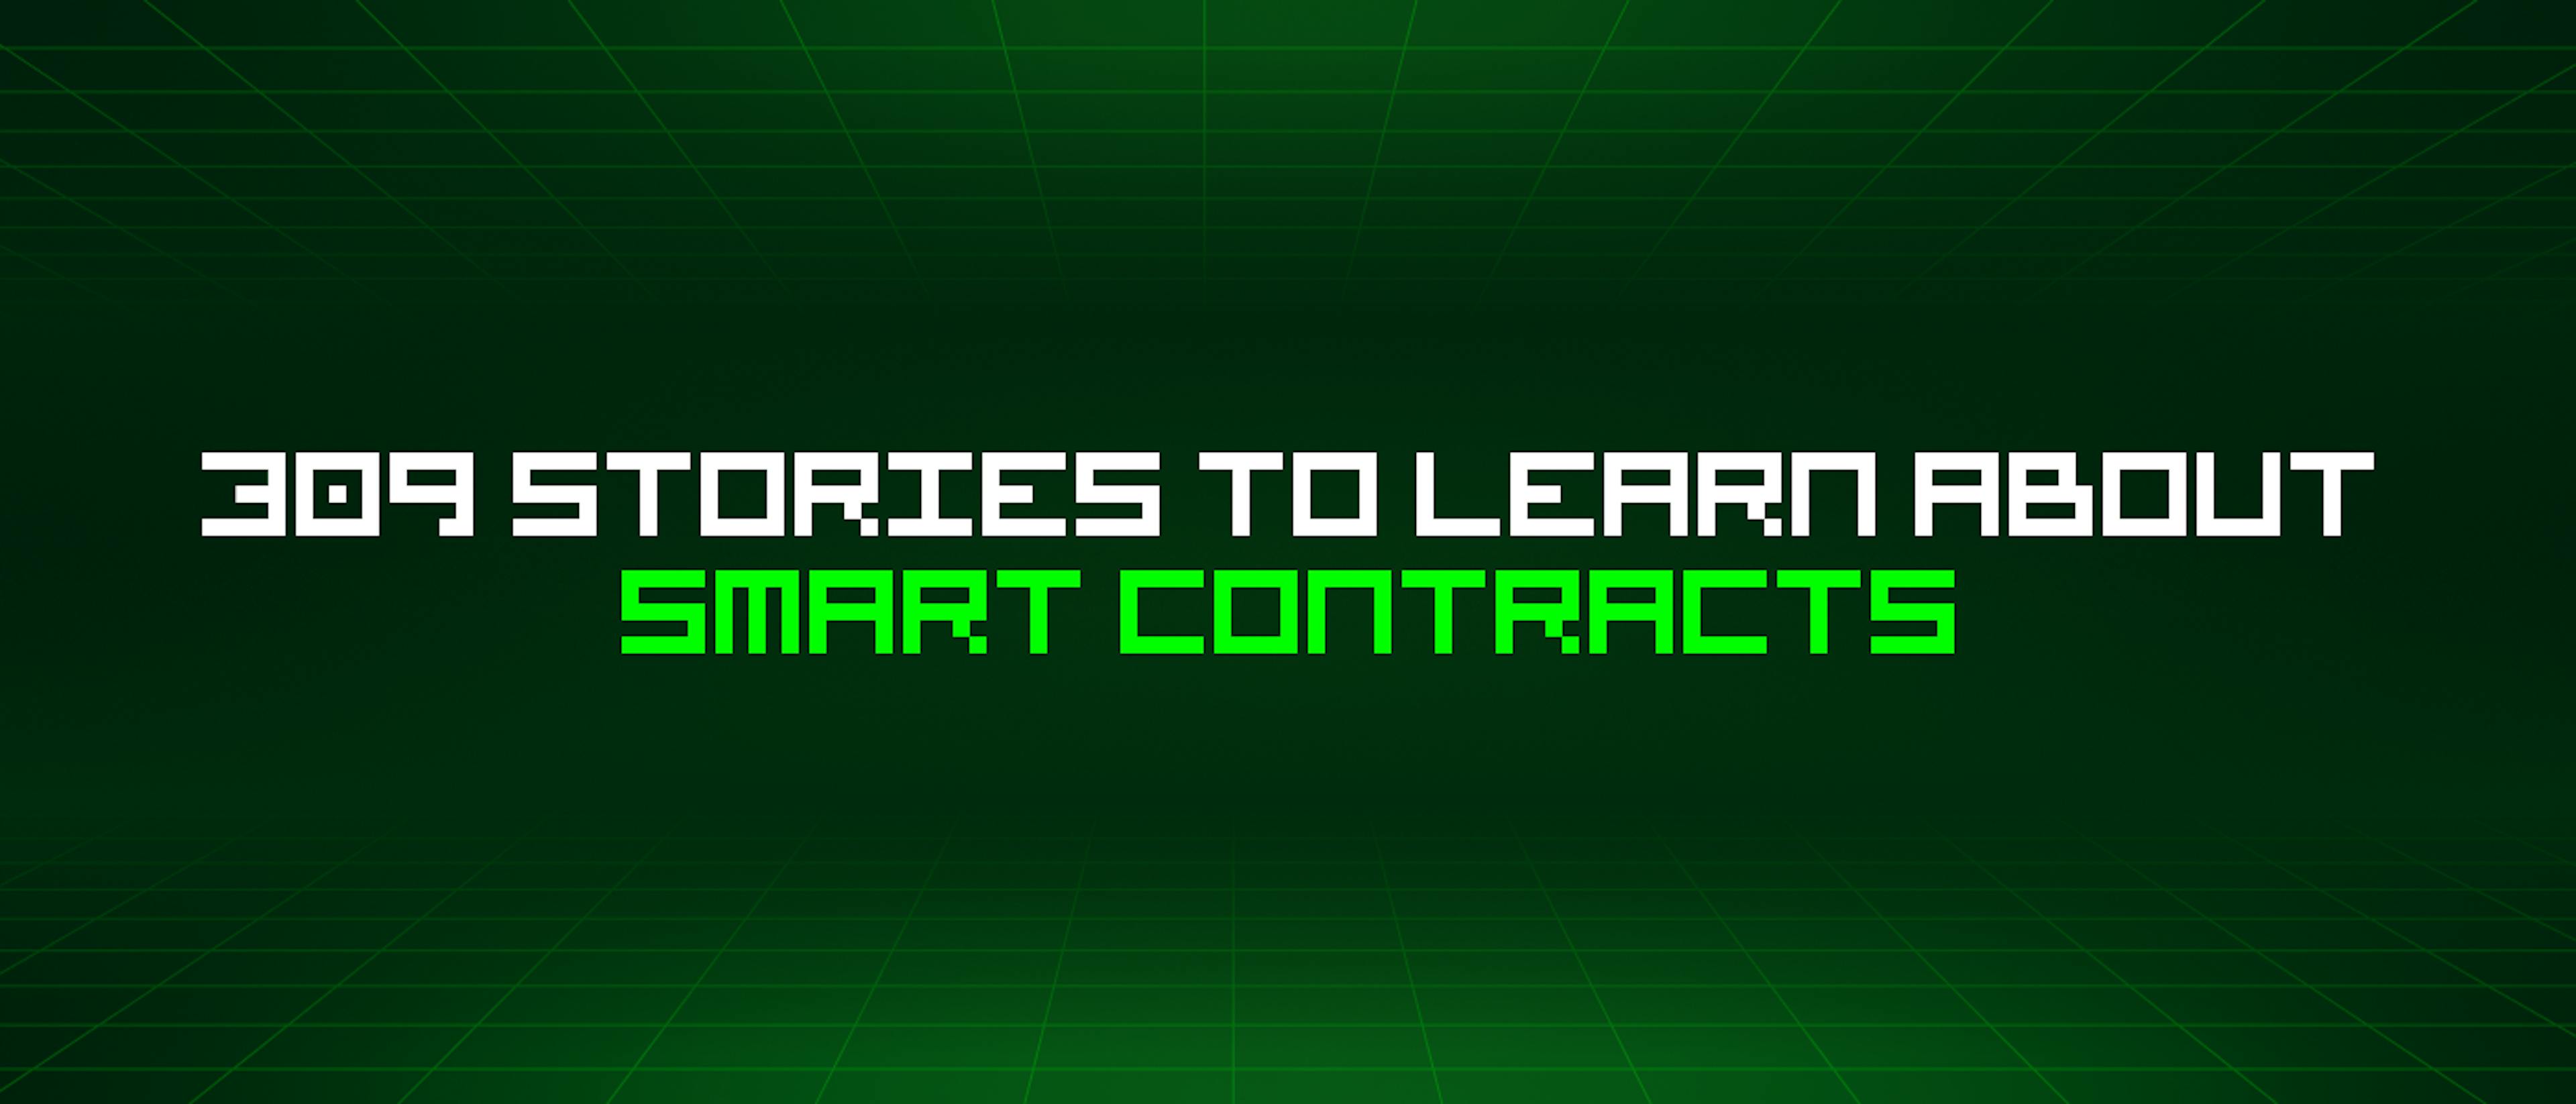 featured image - 309 Stories To Learn About Smart Contracts